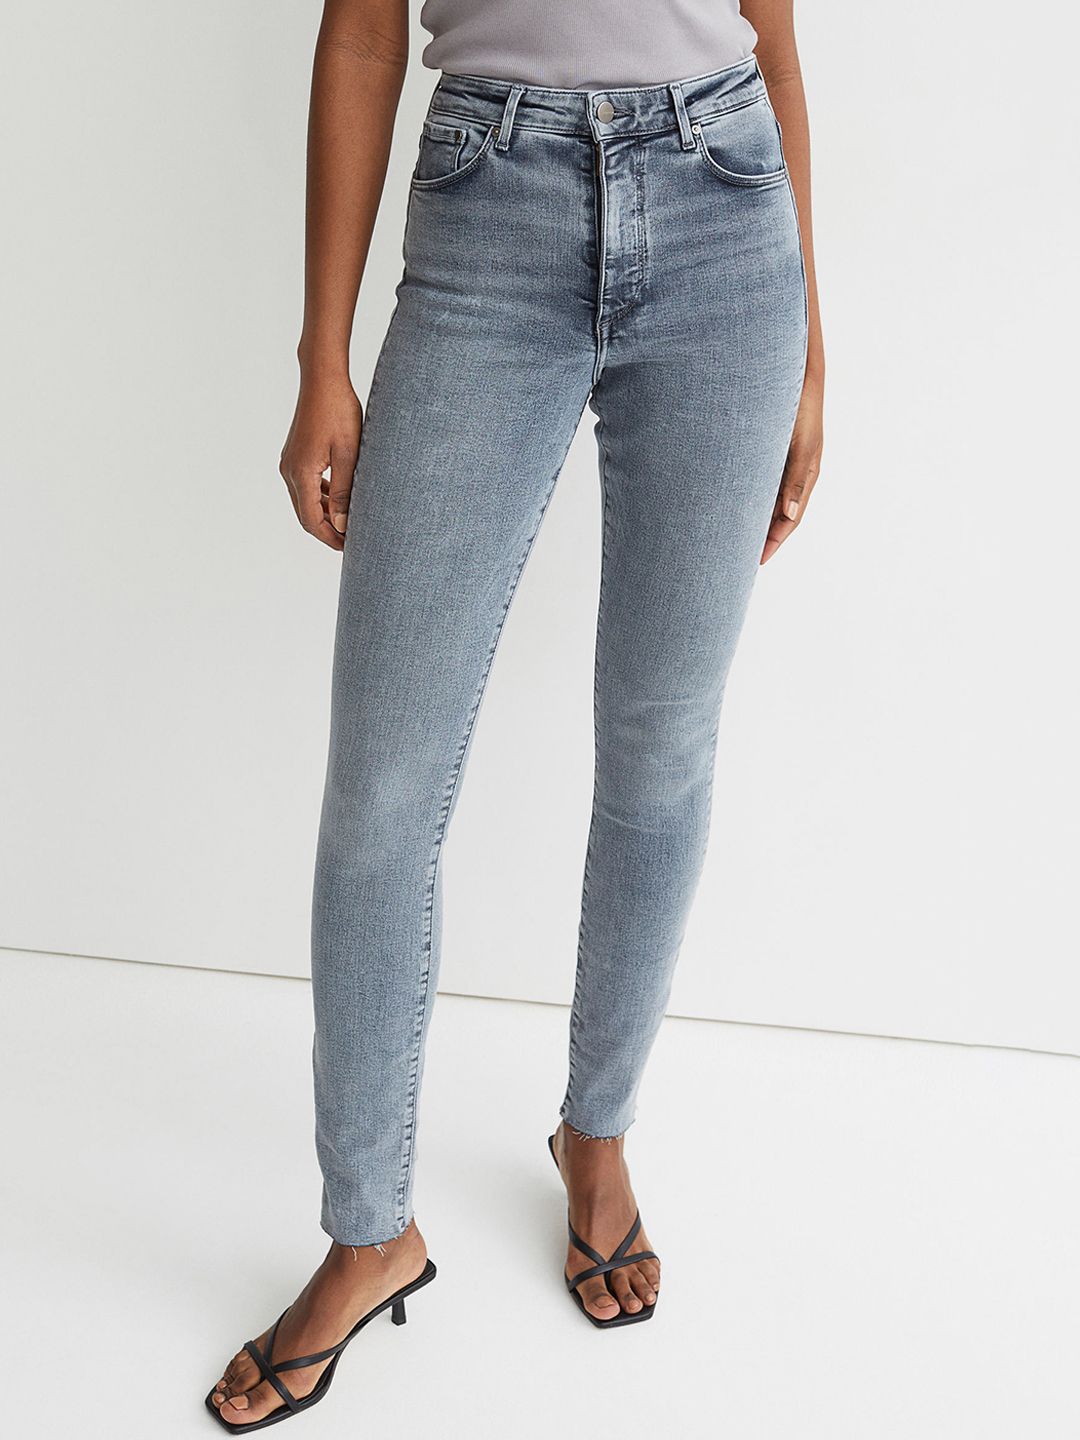 H&M Woman Blue Shaping High Jeans Price in India